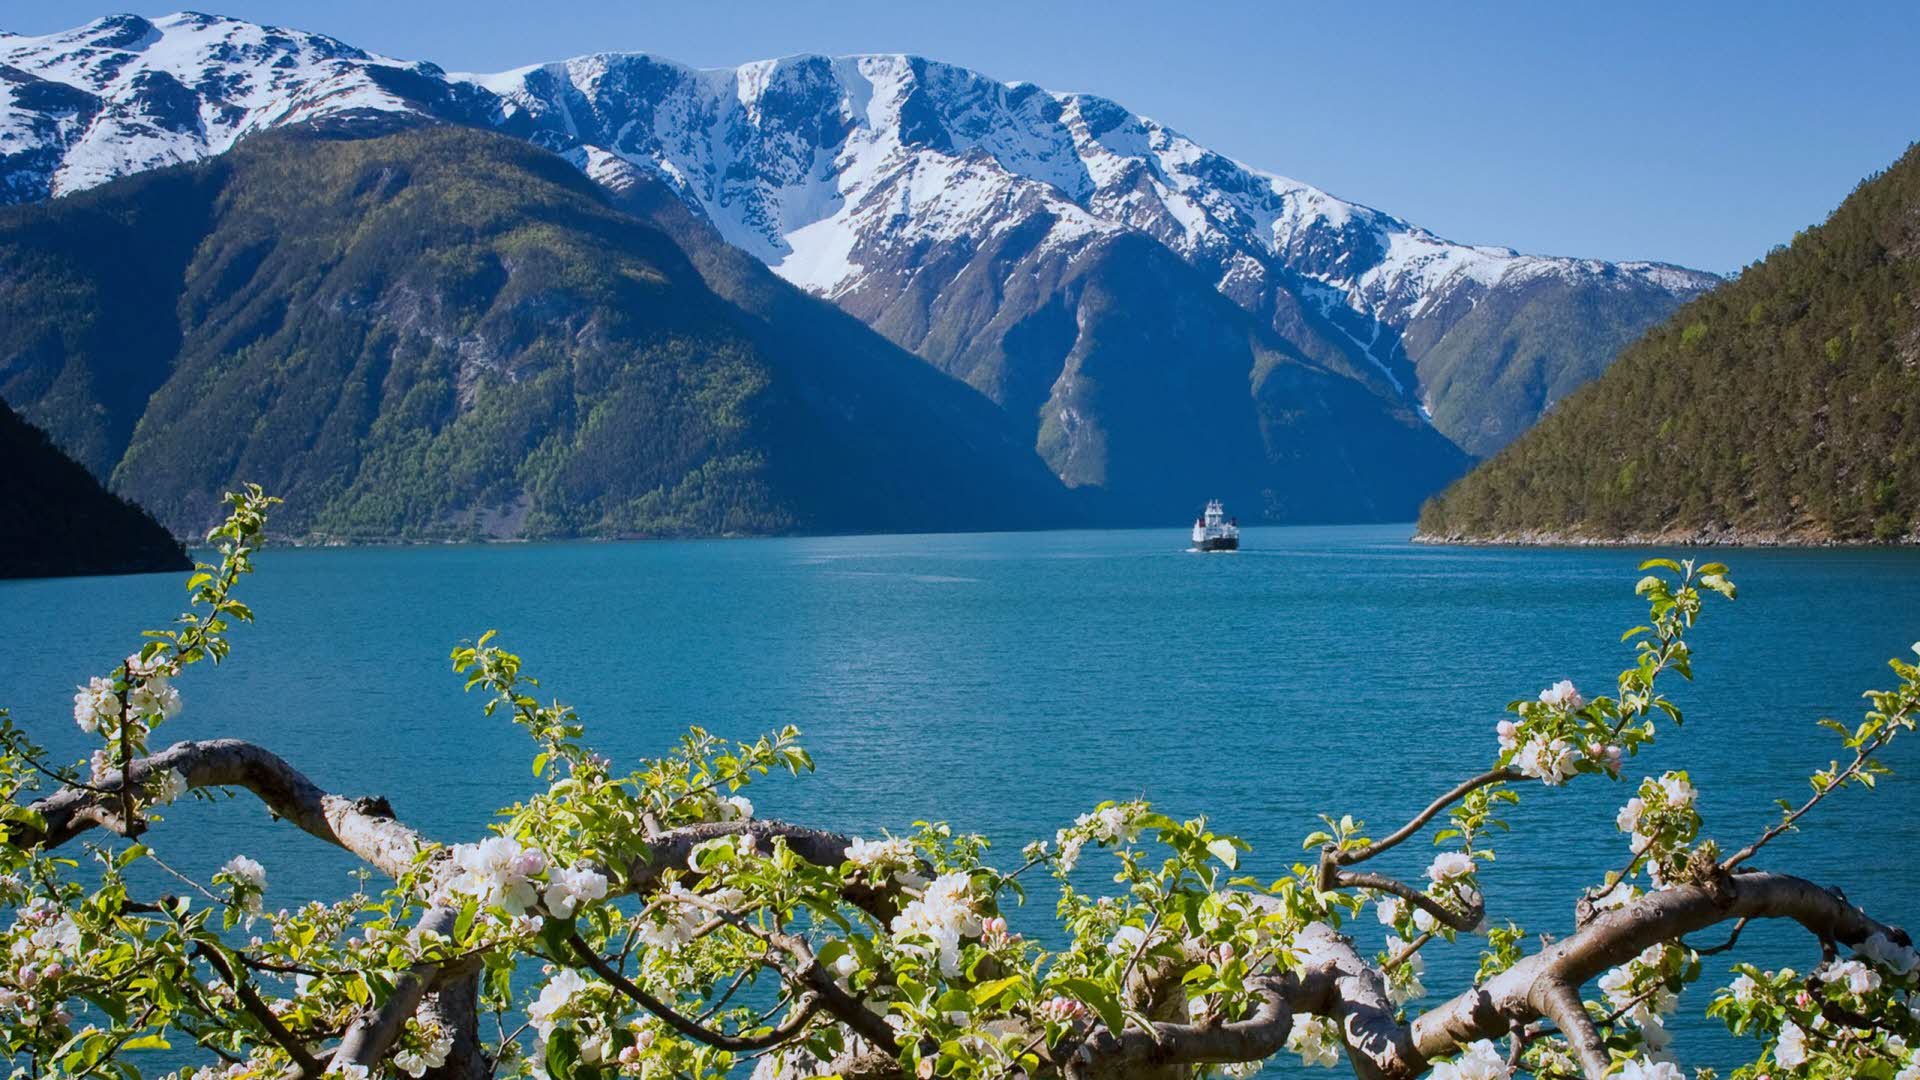 A ferry sails through the Sognefjord in spring, with snow-capped peaks and flowering fruit trees in the foreground.